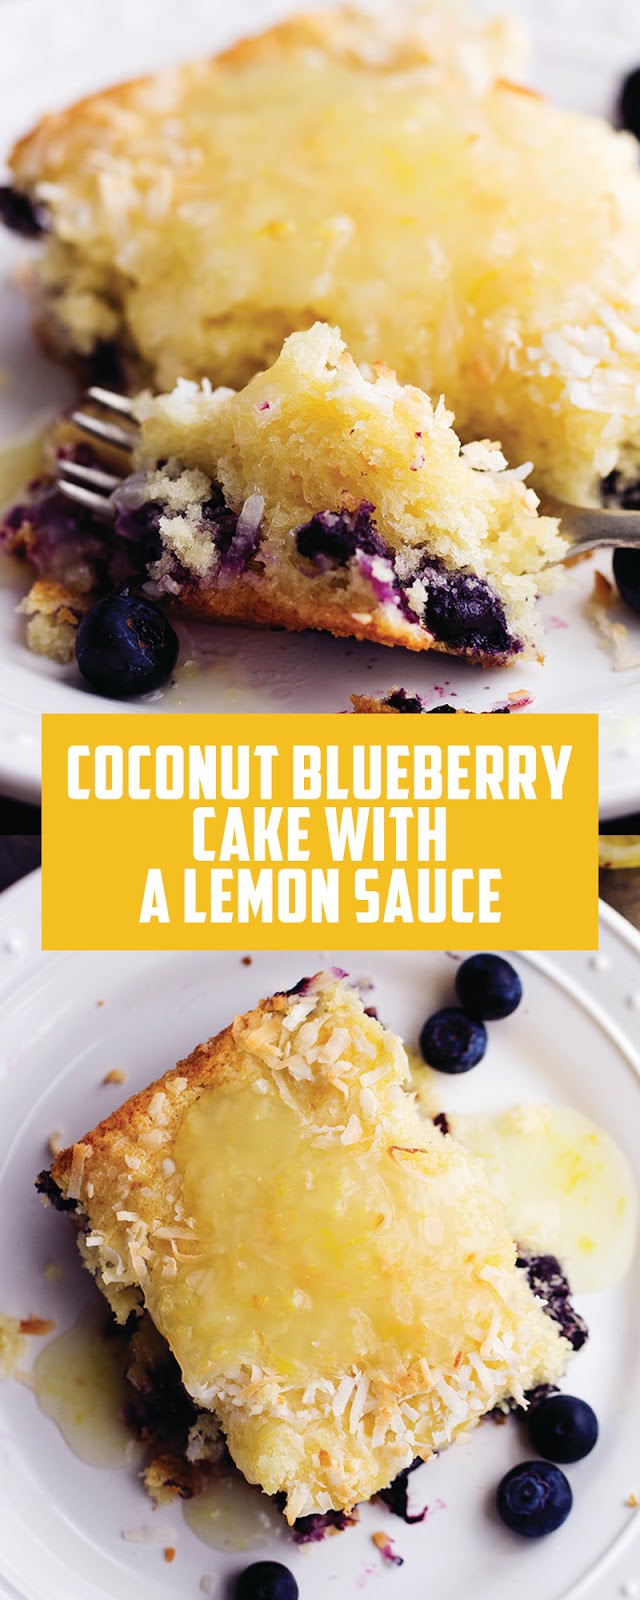 COCONUT BLUEBERRY CAKE WITH A LEMON SAUCE